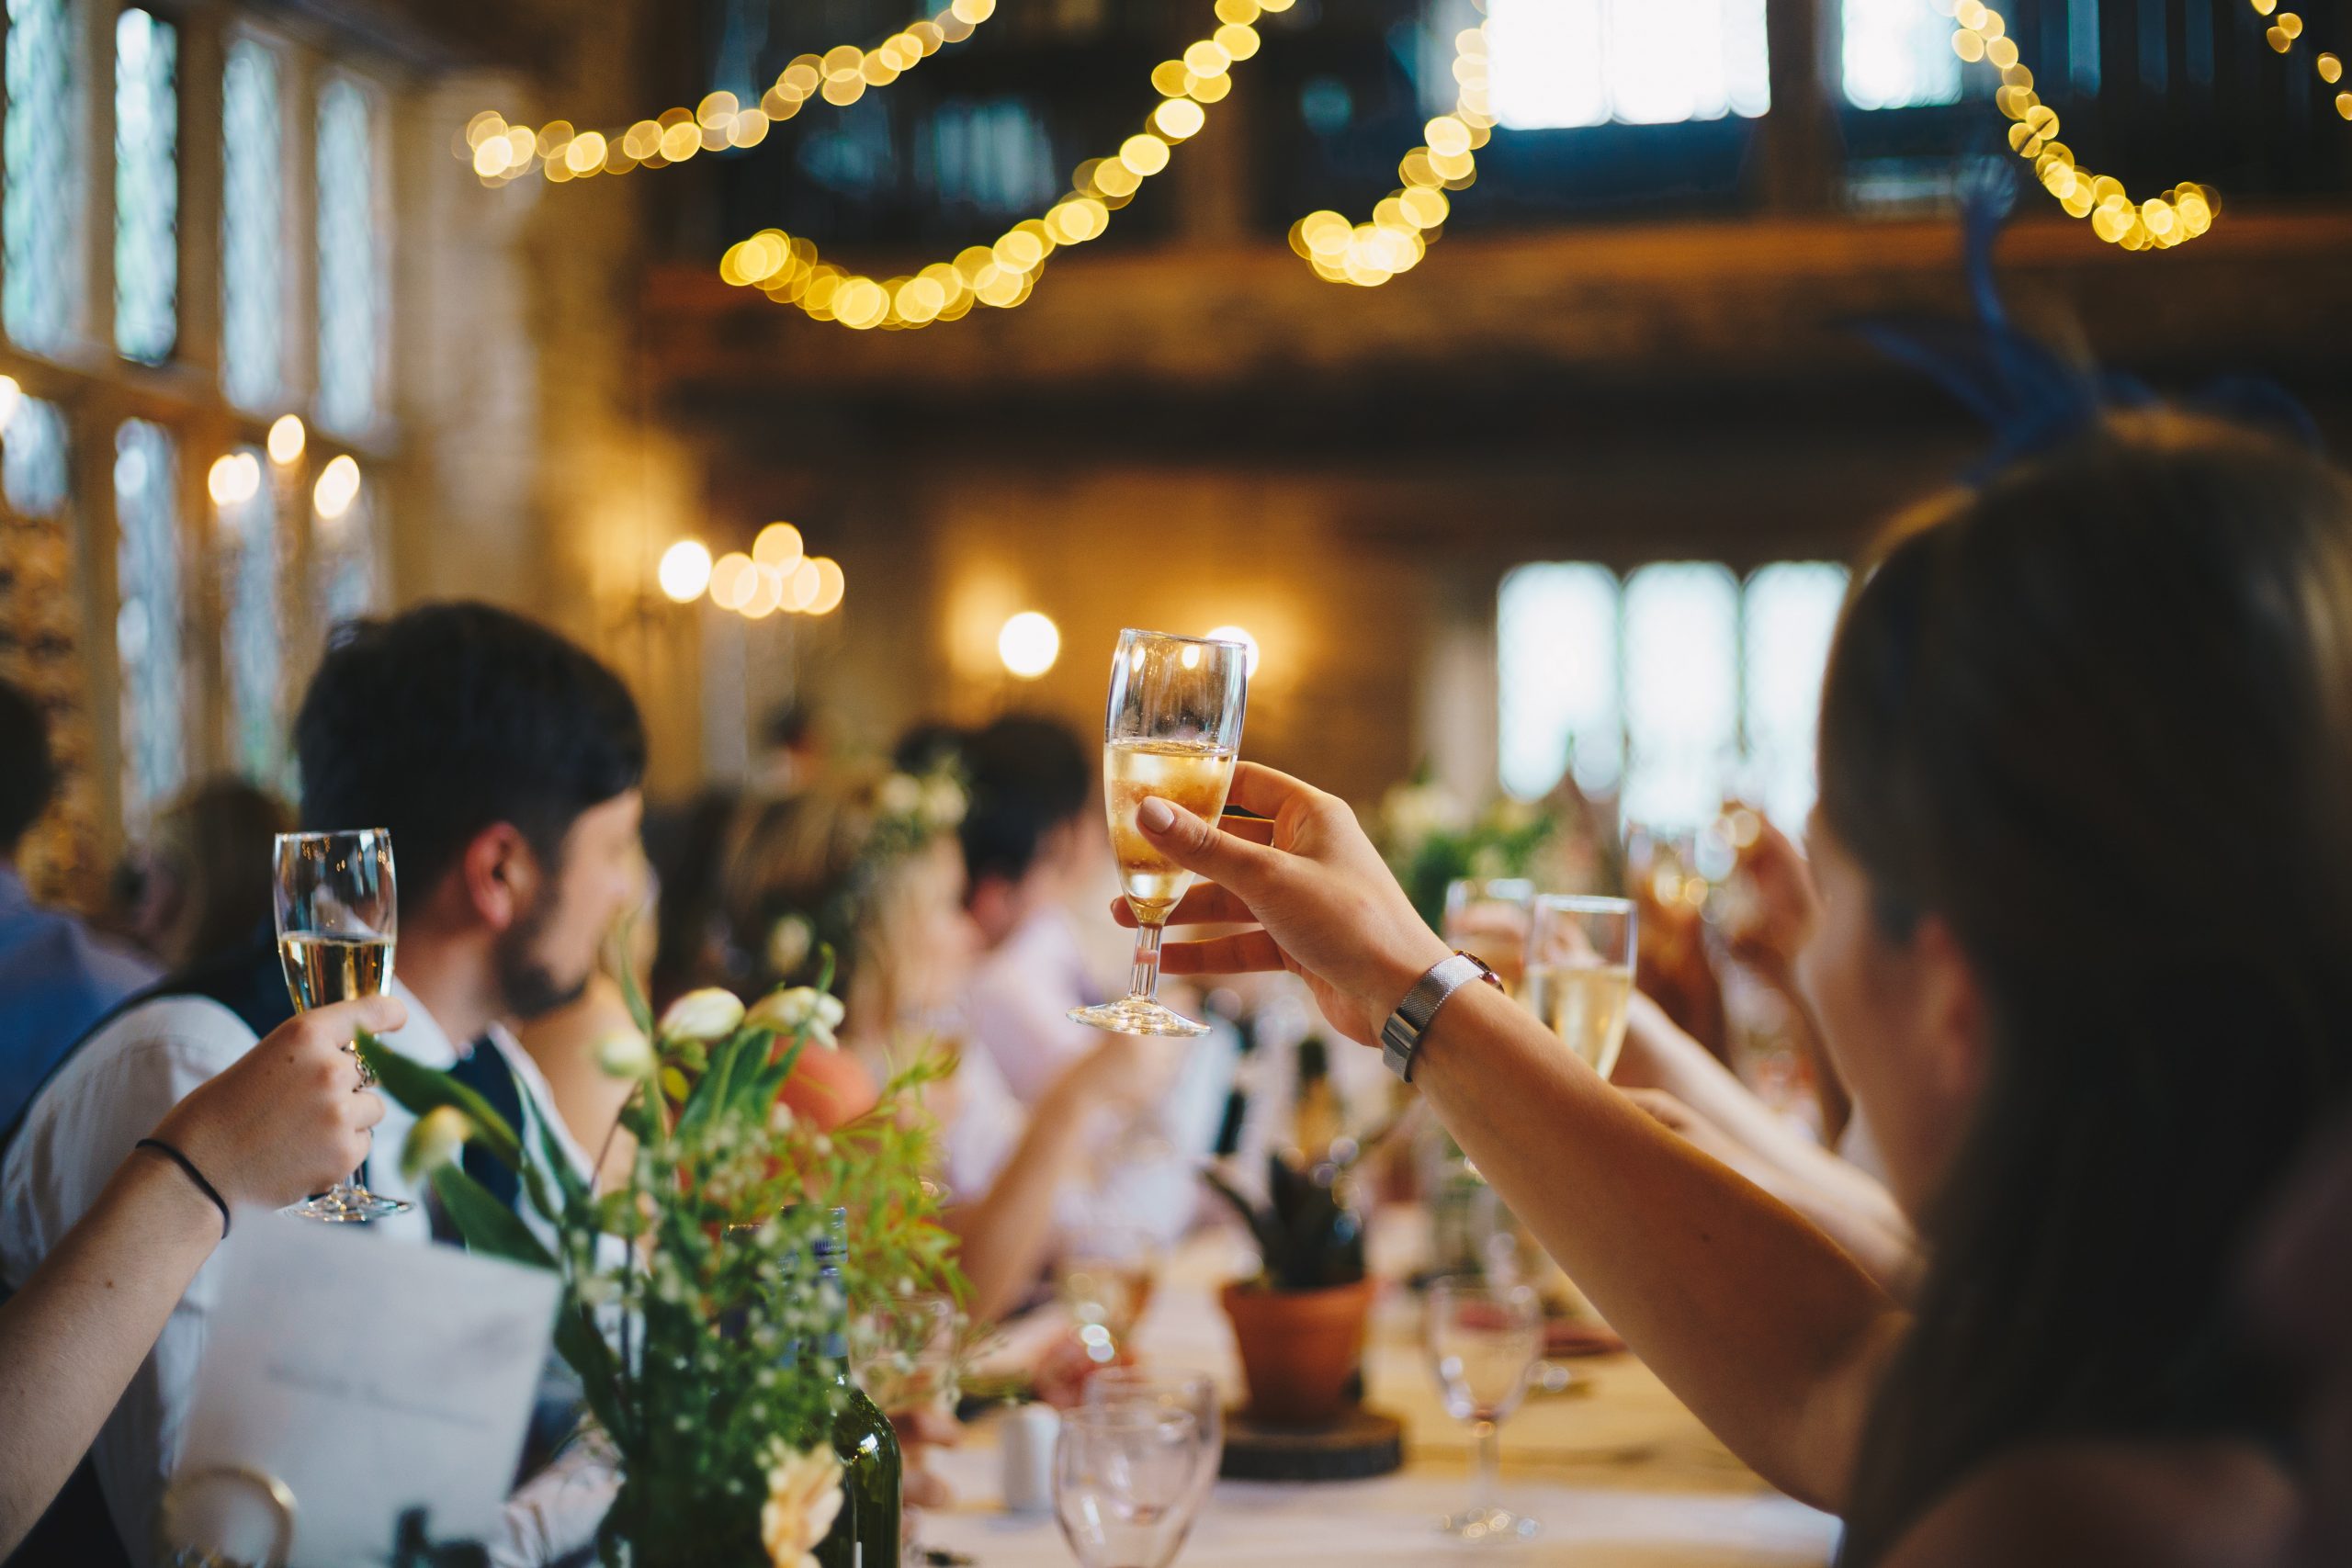 Plan an Unforgettable Wedding Reception at Upscale Restaurants in Raleigh NC